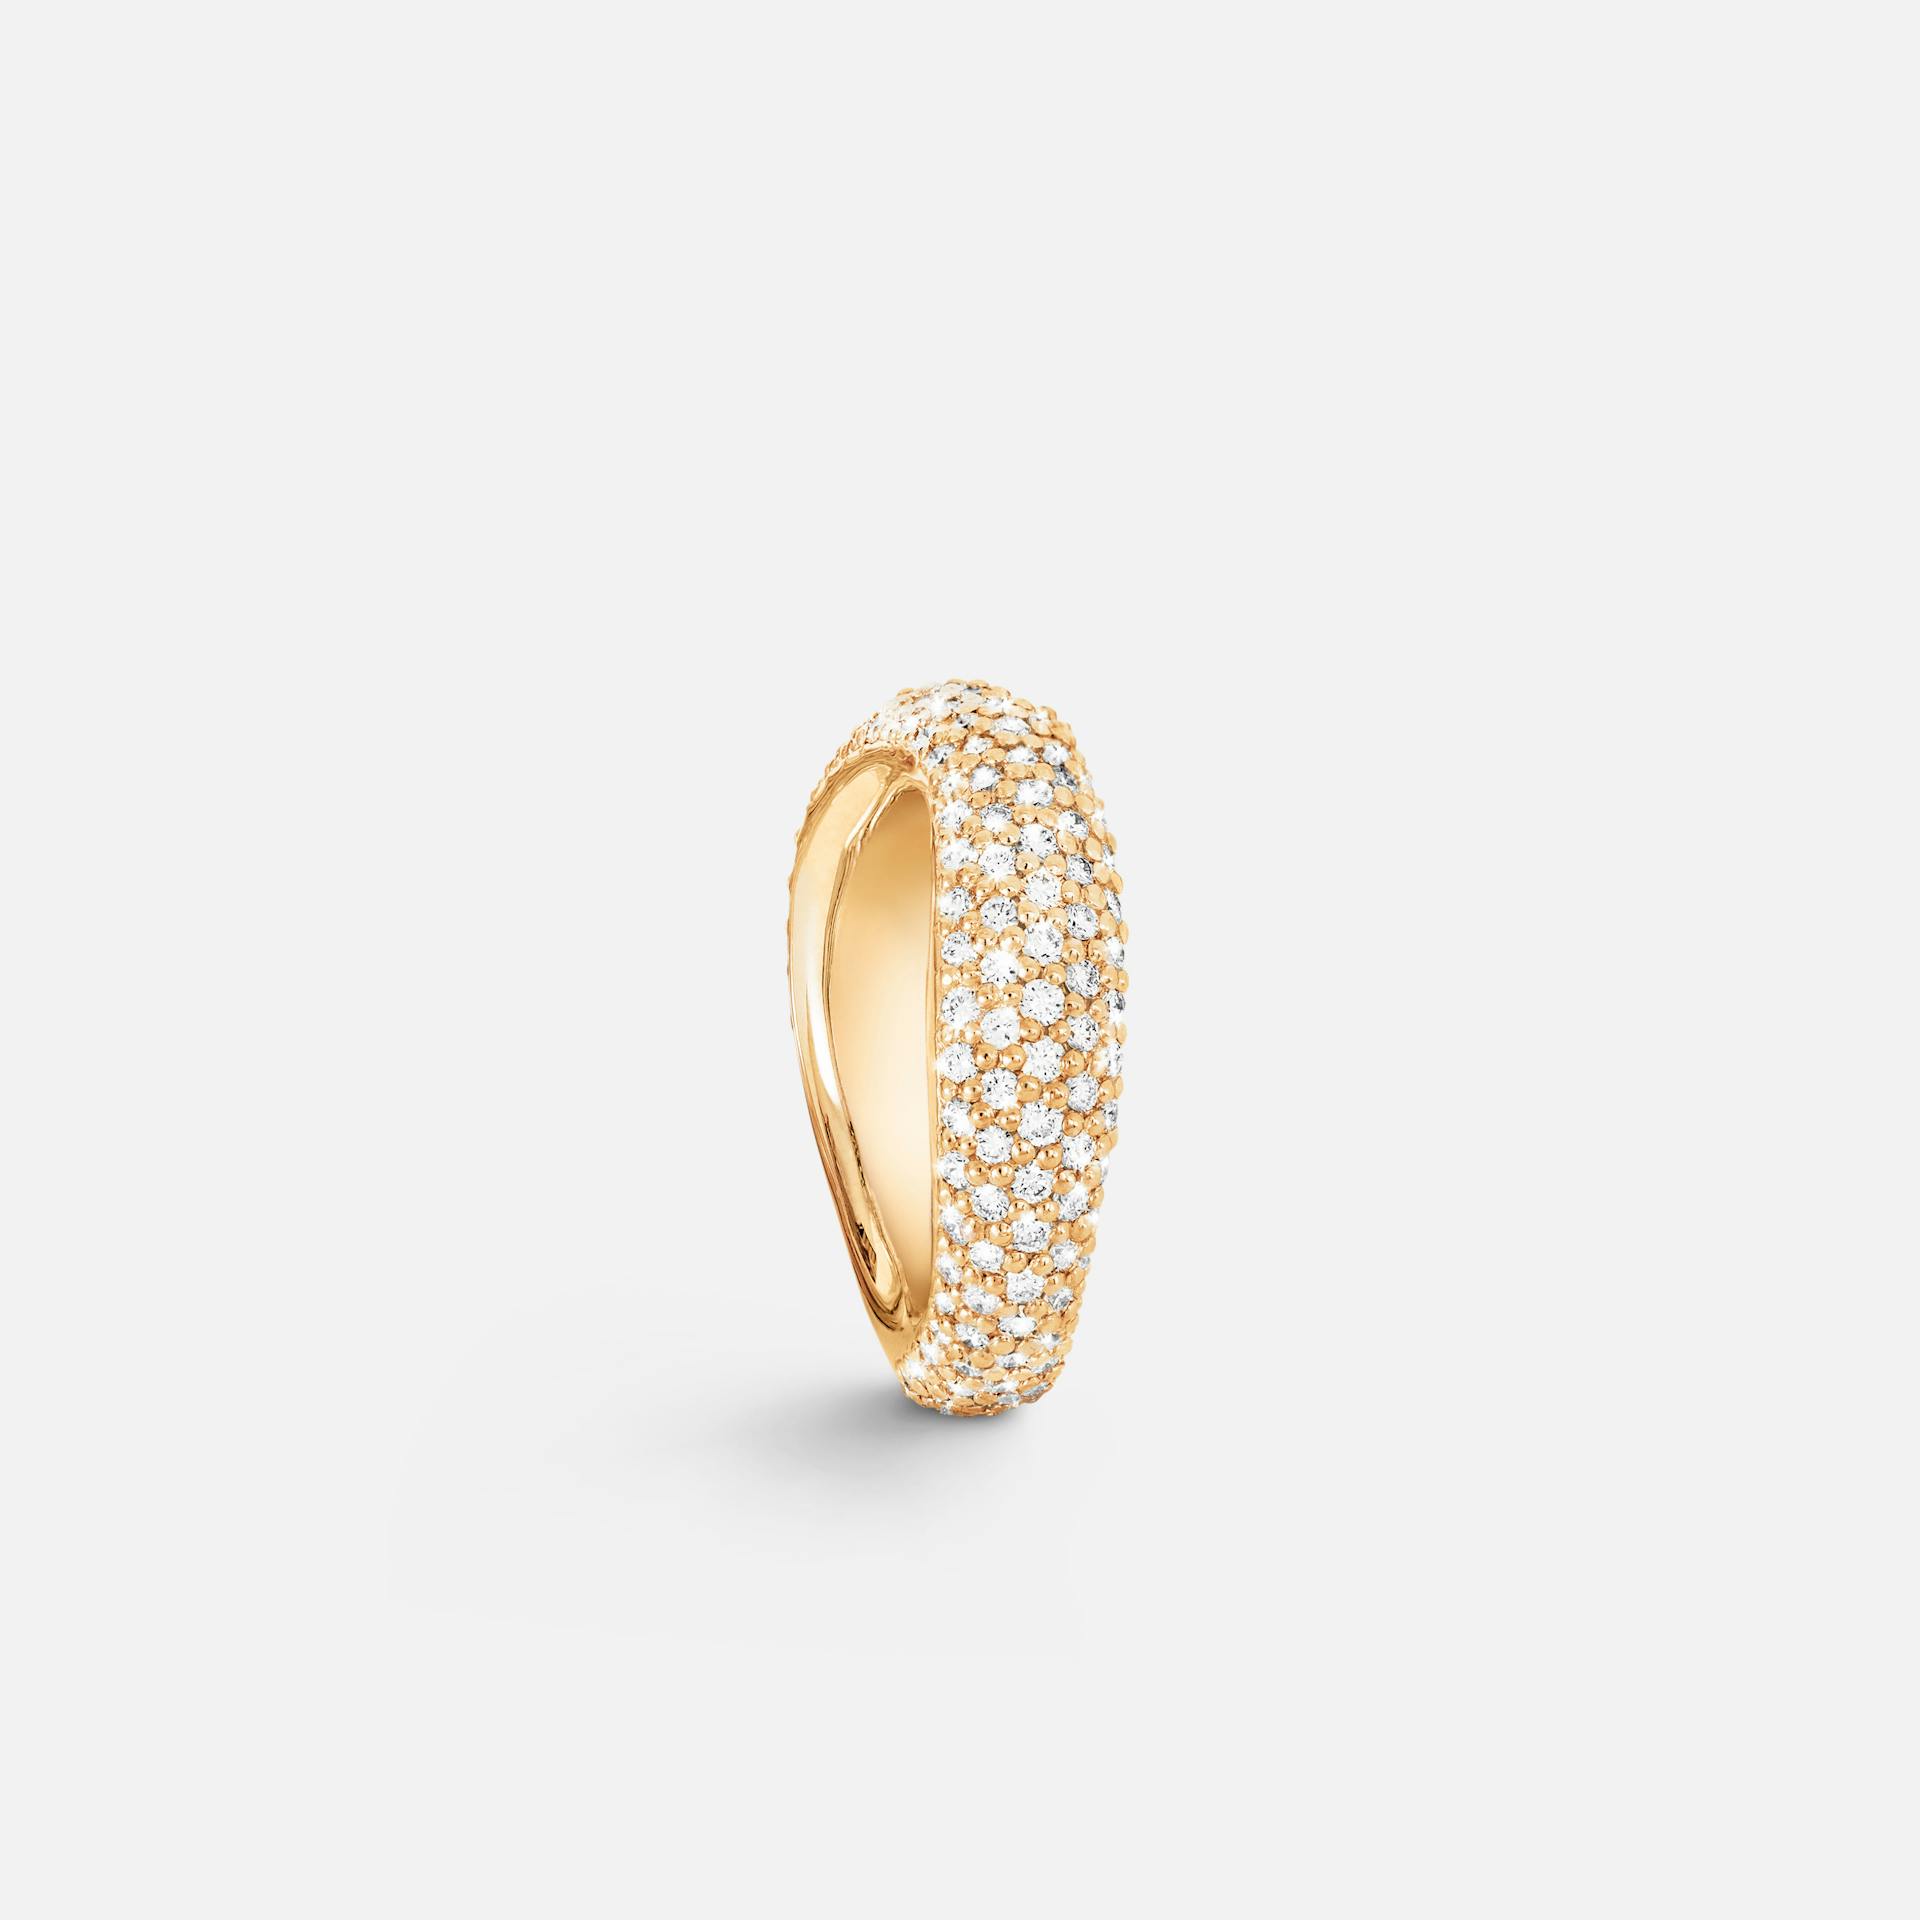 Love Ring No 5 in Polished Yellow Gold with Diamonds  |  Ole Lynggaard Copenhagen 